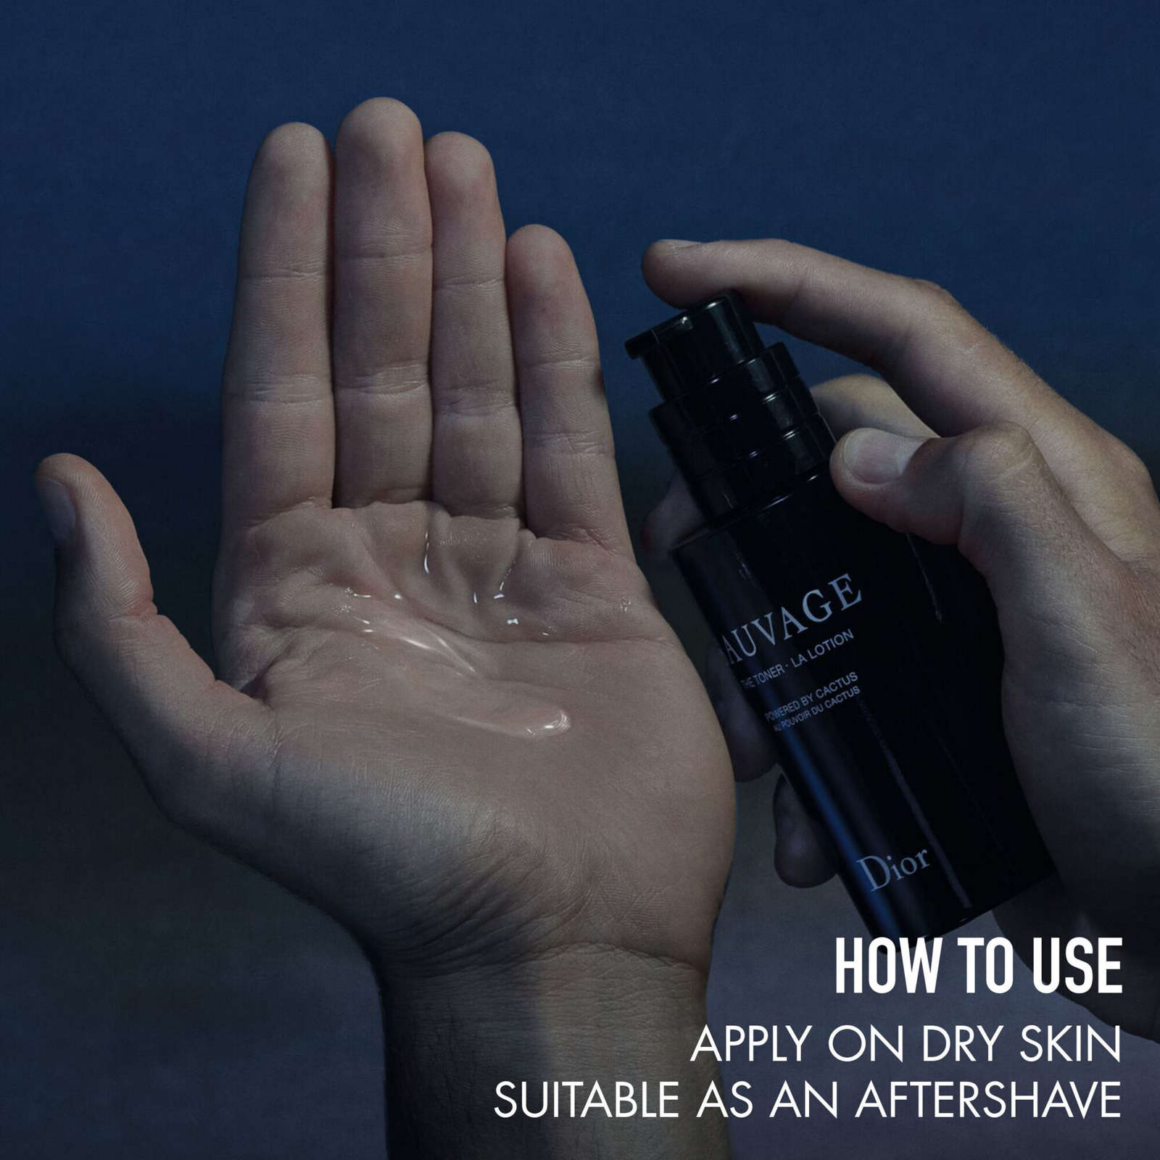 How to use the toner. Dior beauty's Sauvage mencare skincare collection line made from Cactus new.